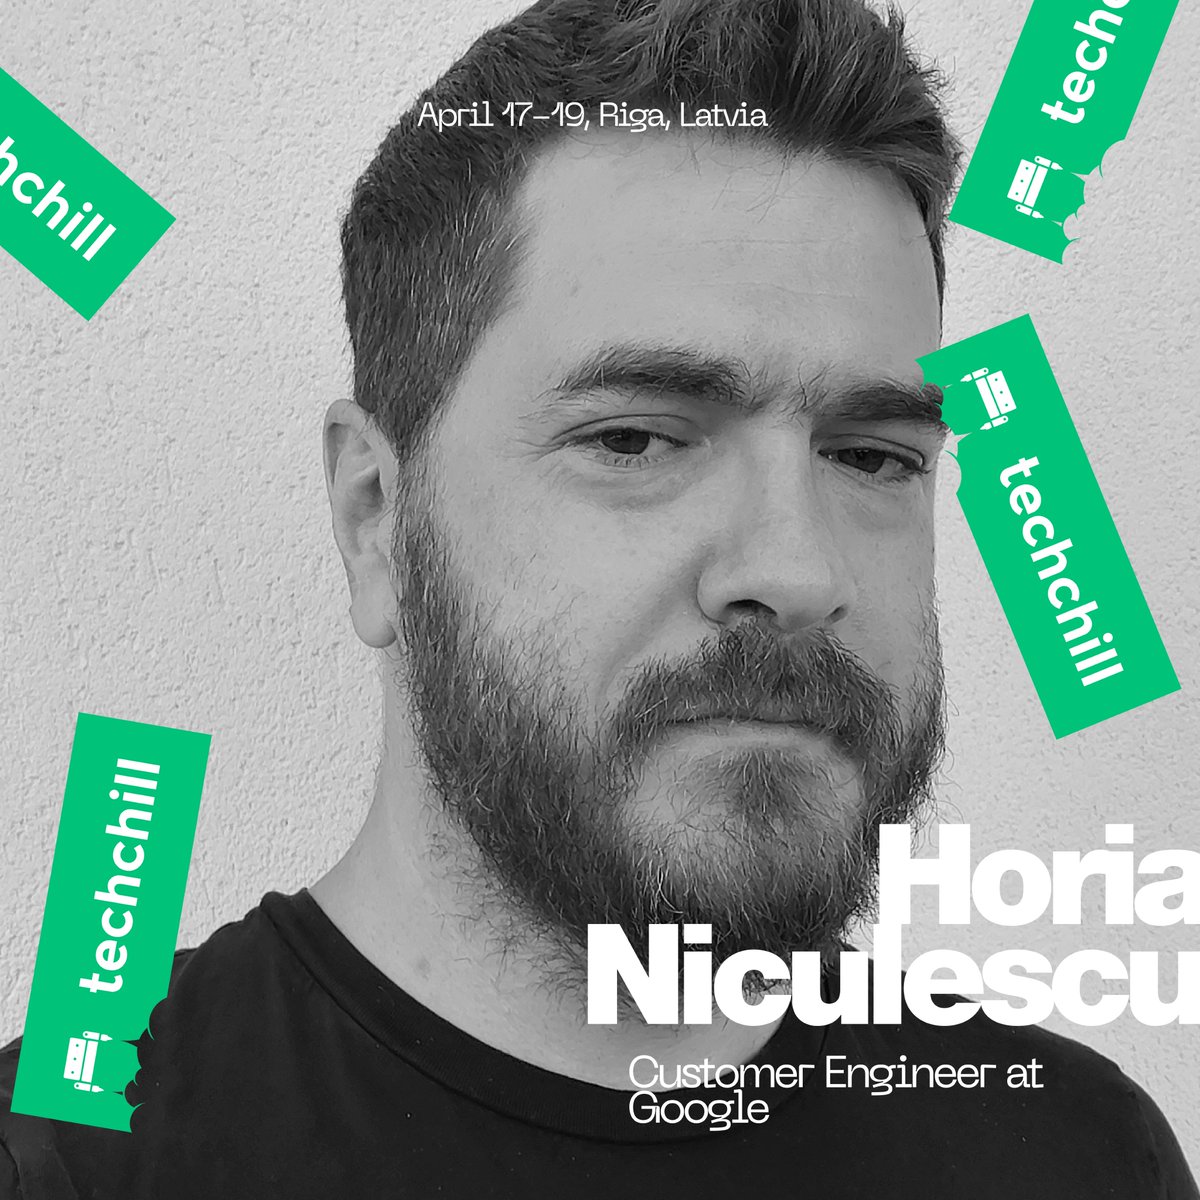 Horia Niculescu, Customer Engineer at @Google, a speaker for TechChill 2024! With a passion for data and extensive experience in helping organizations grow, Horia brings invaluable insights to the table. Join us in Riga on April 17-19 techchill.co/get-pass